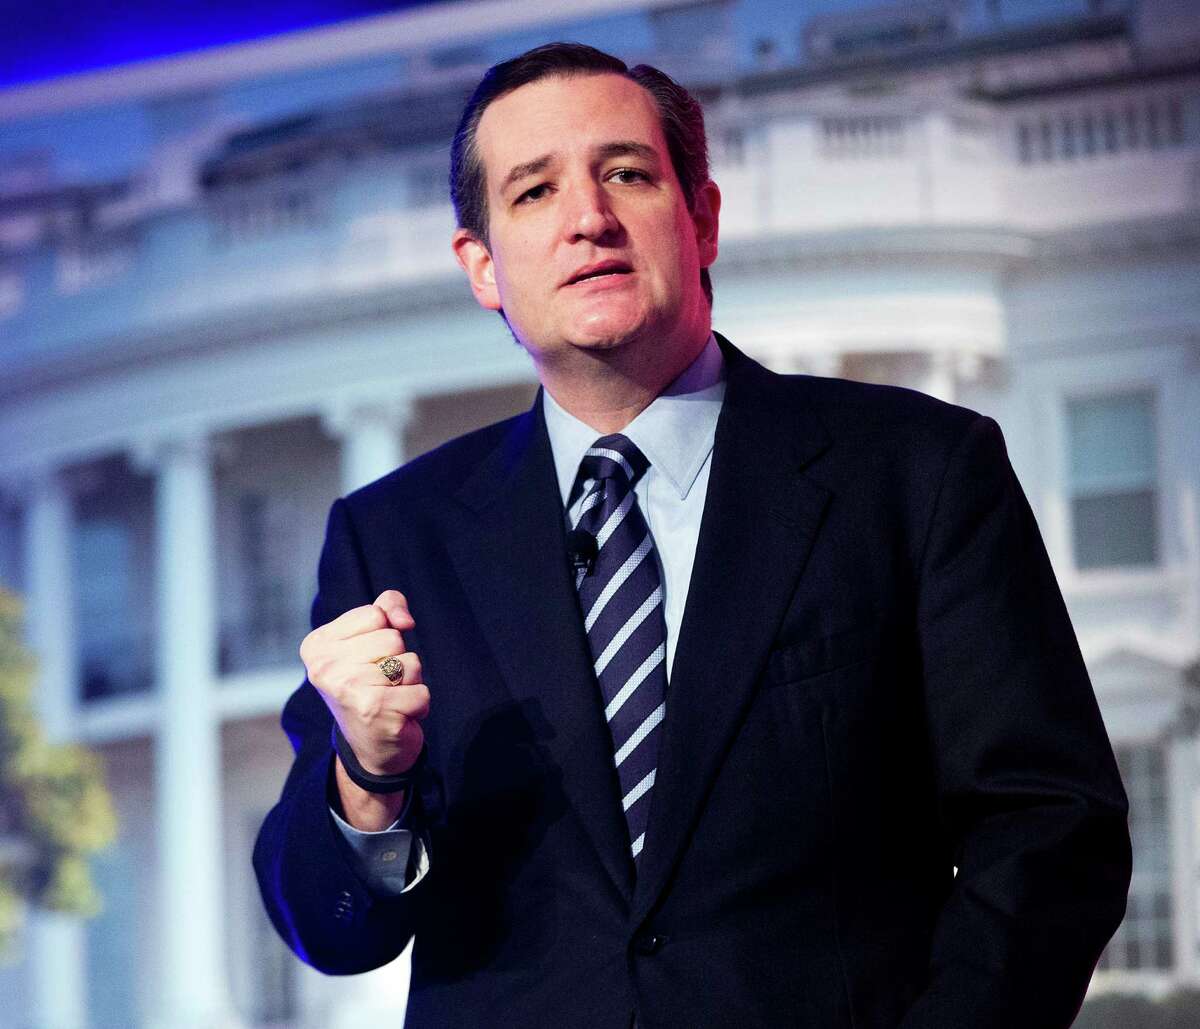 In this March 10, 2015, photo, Sen. Ted Cruz, R-Texas, speaks at the International Association of Firefighters (IAFF) Legislative Conference and Presidential Forum in Washington. A pair of lawyers who have represented presidents from both parties at the Supreme Court says Cruz is legally eligible to run for president. Solicitor General Paul Clement and former Obama acting Solicitor General Neal Katyal are writing in the Harvard Law Review that the Canadian-born Cruz meets the constitutional standard to be a presidential contender. The bipartisan duo's commentary comes as Cruz moves toward an expected White House run.